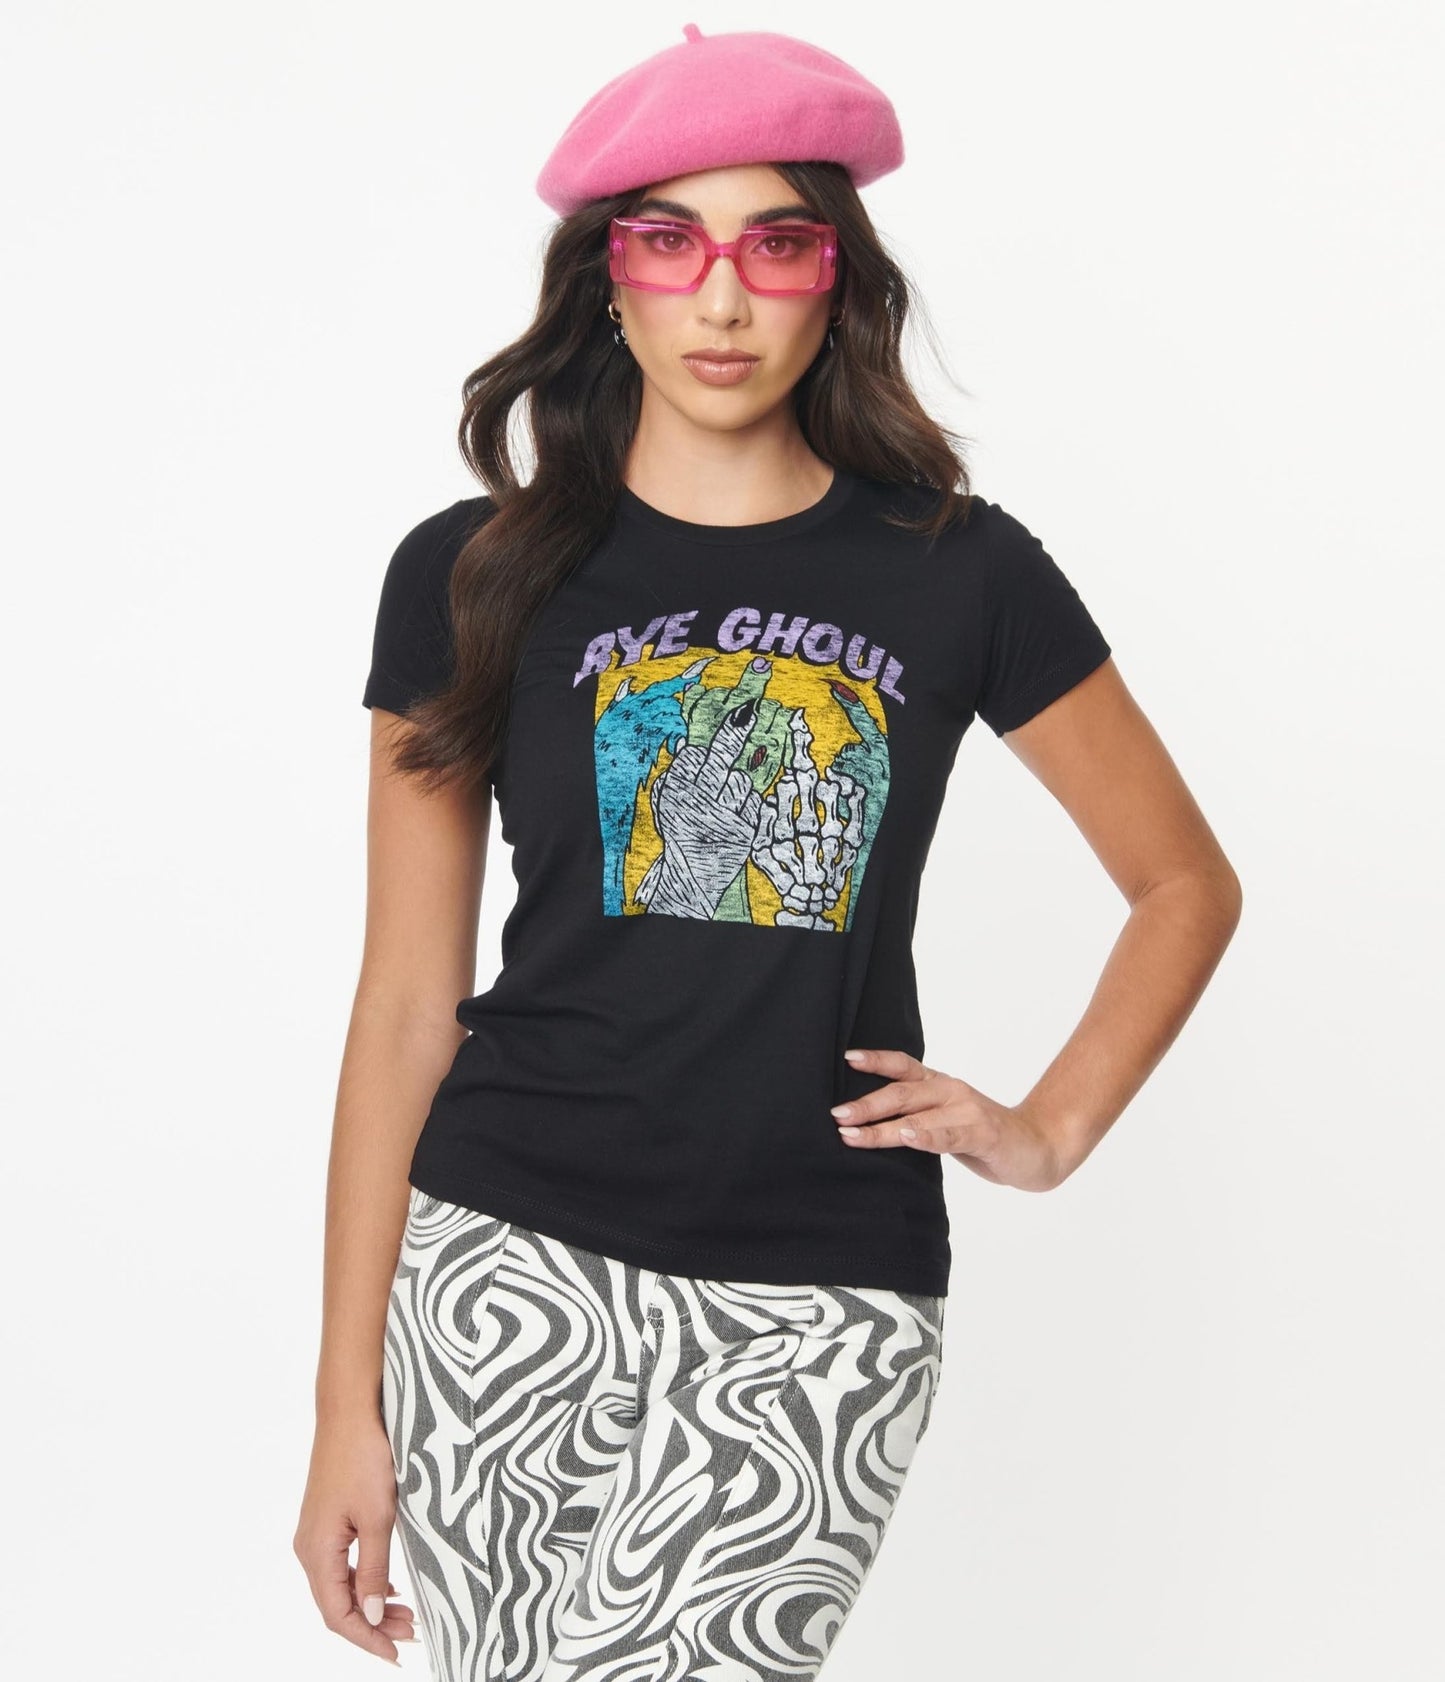 Unique Vintage Bye Ghoul Fitted Graphic Tee - Unique Vintage - Womens, GRAPHIC TEES, TEES